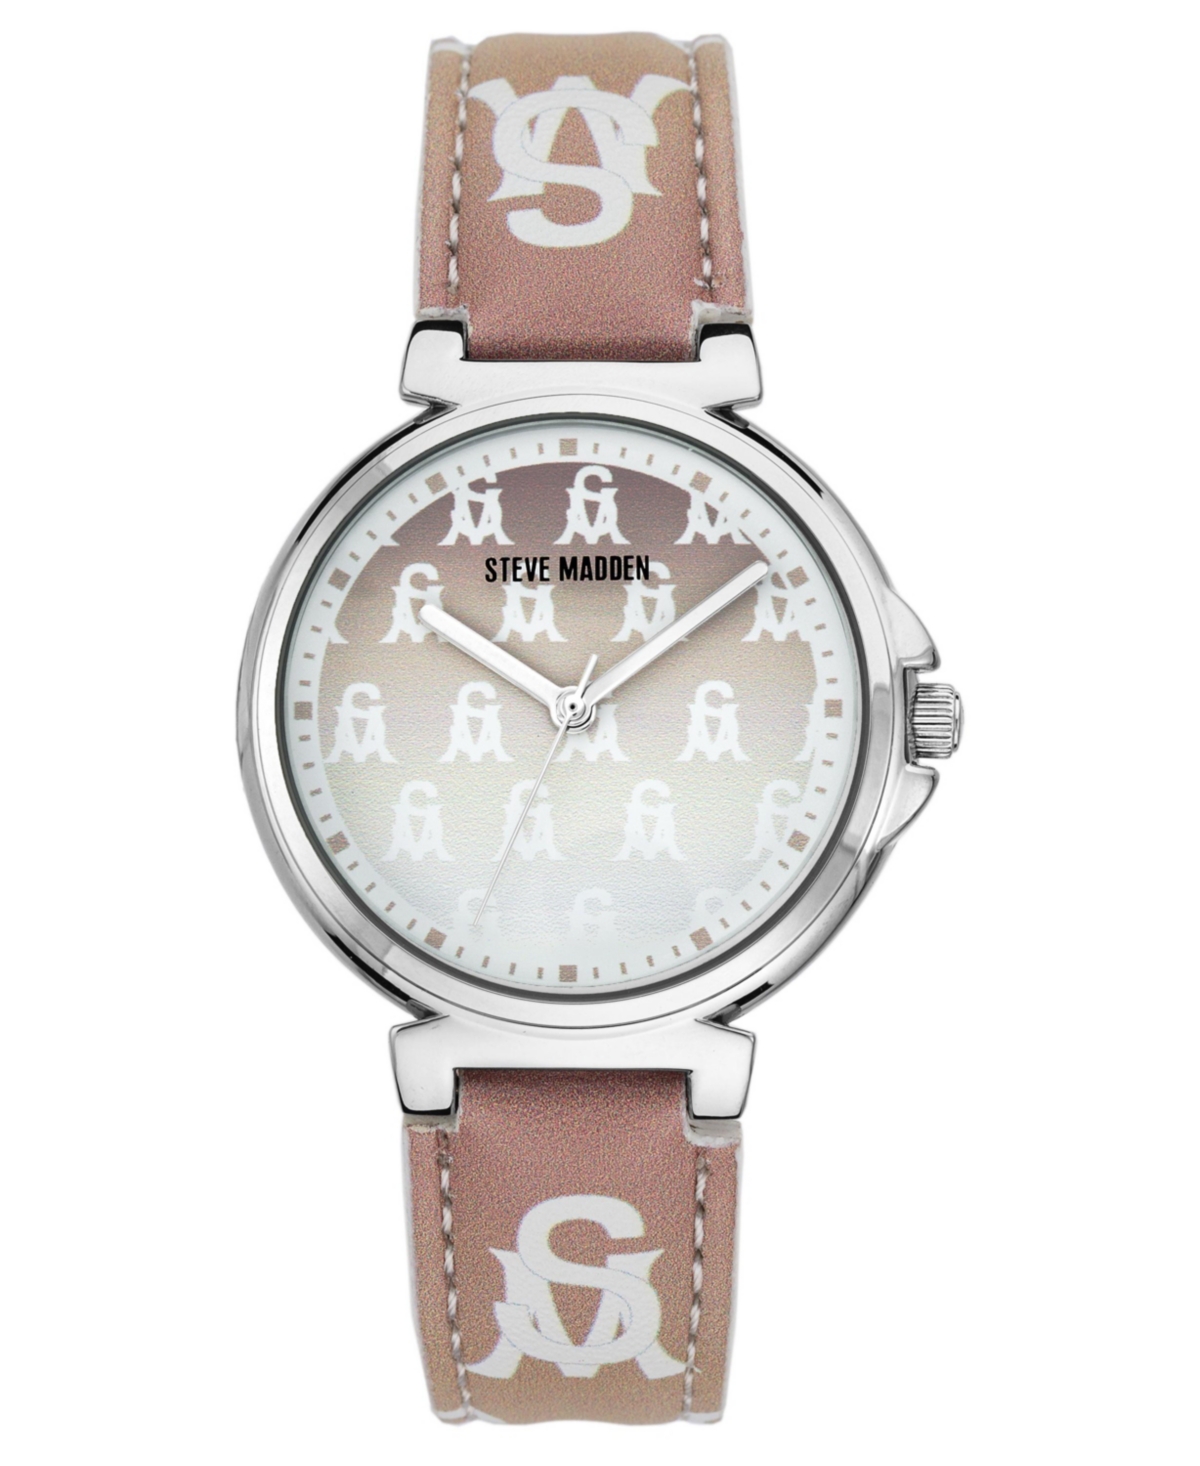 Women's Ombre Tan and White Polyurethane Leather Strap with Steve Madden Logo and Stitching Watch, 36mm - Tan, White